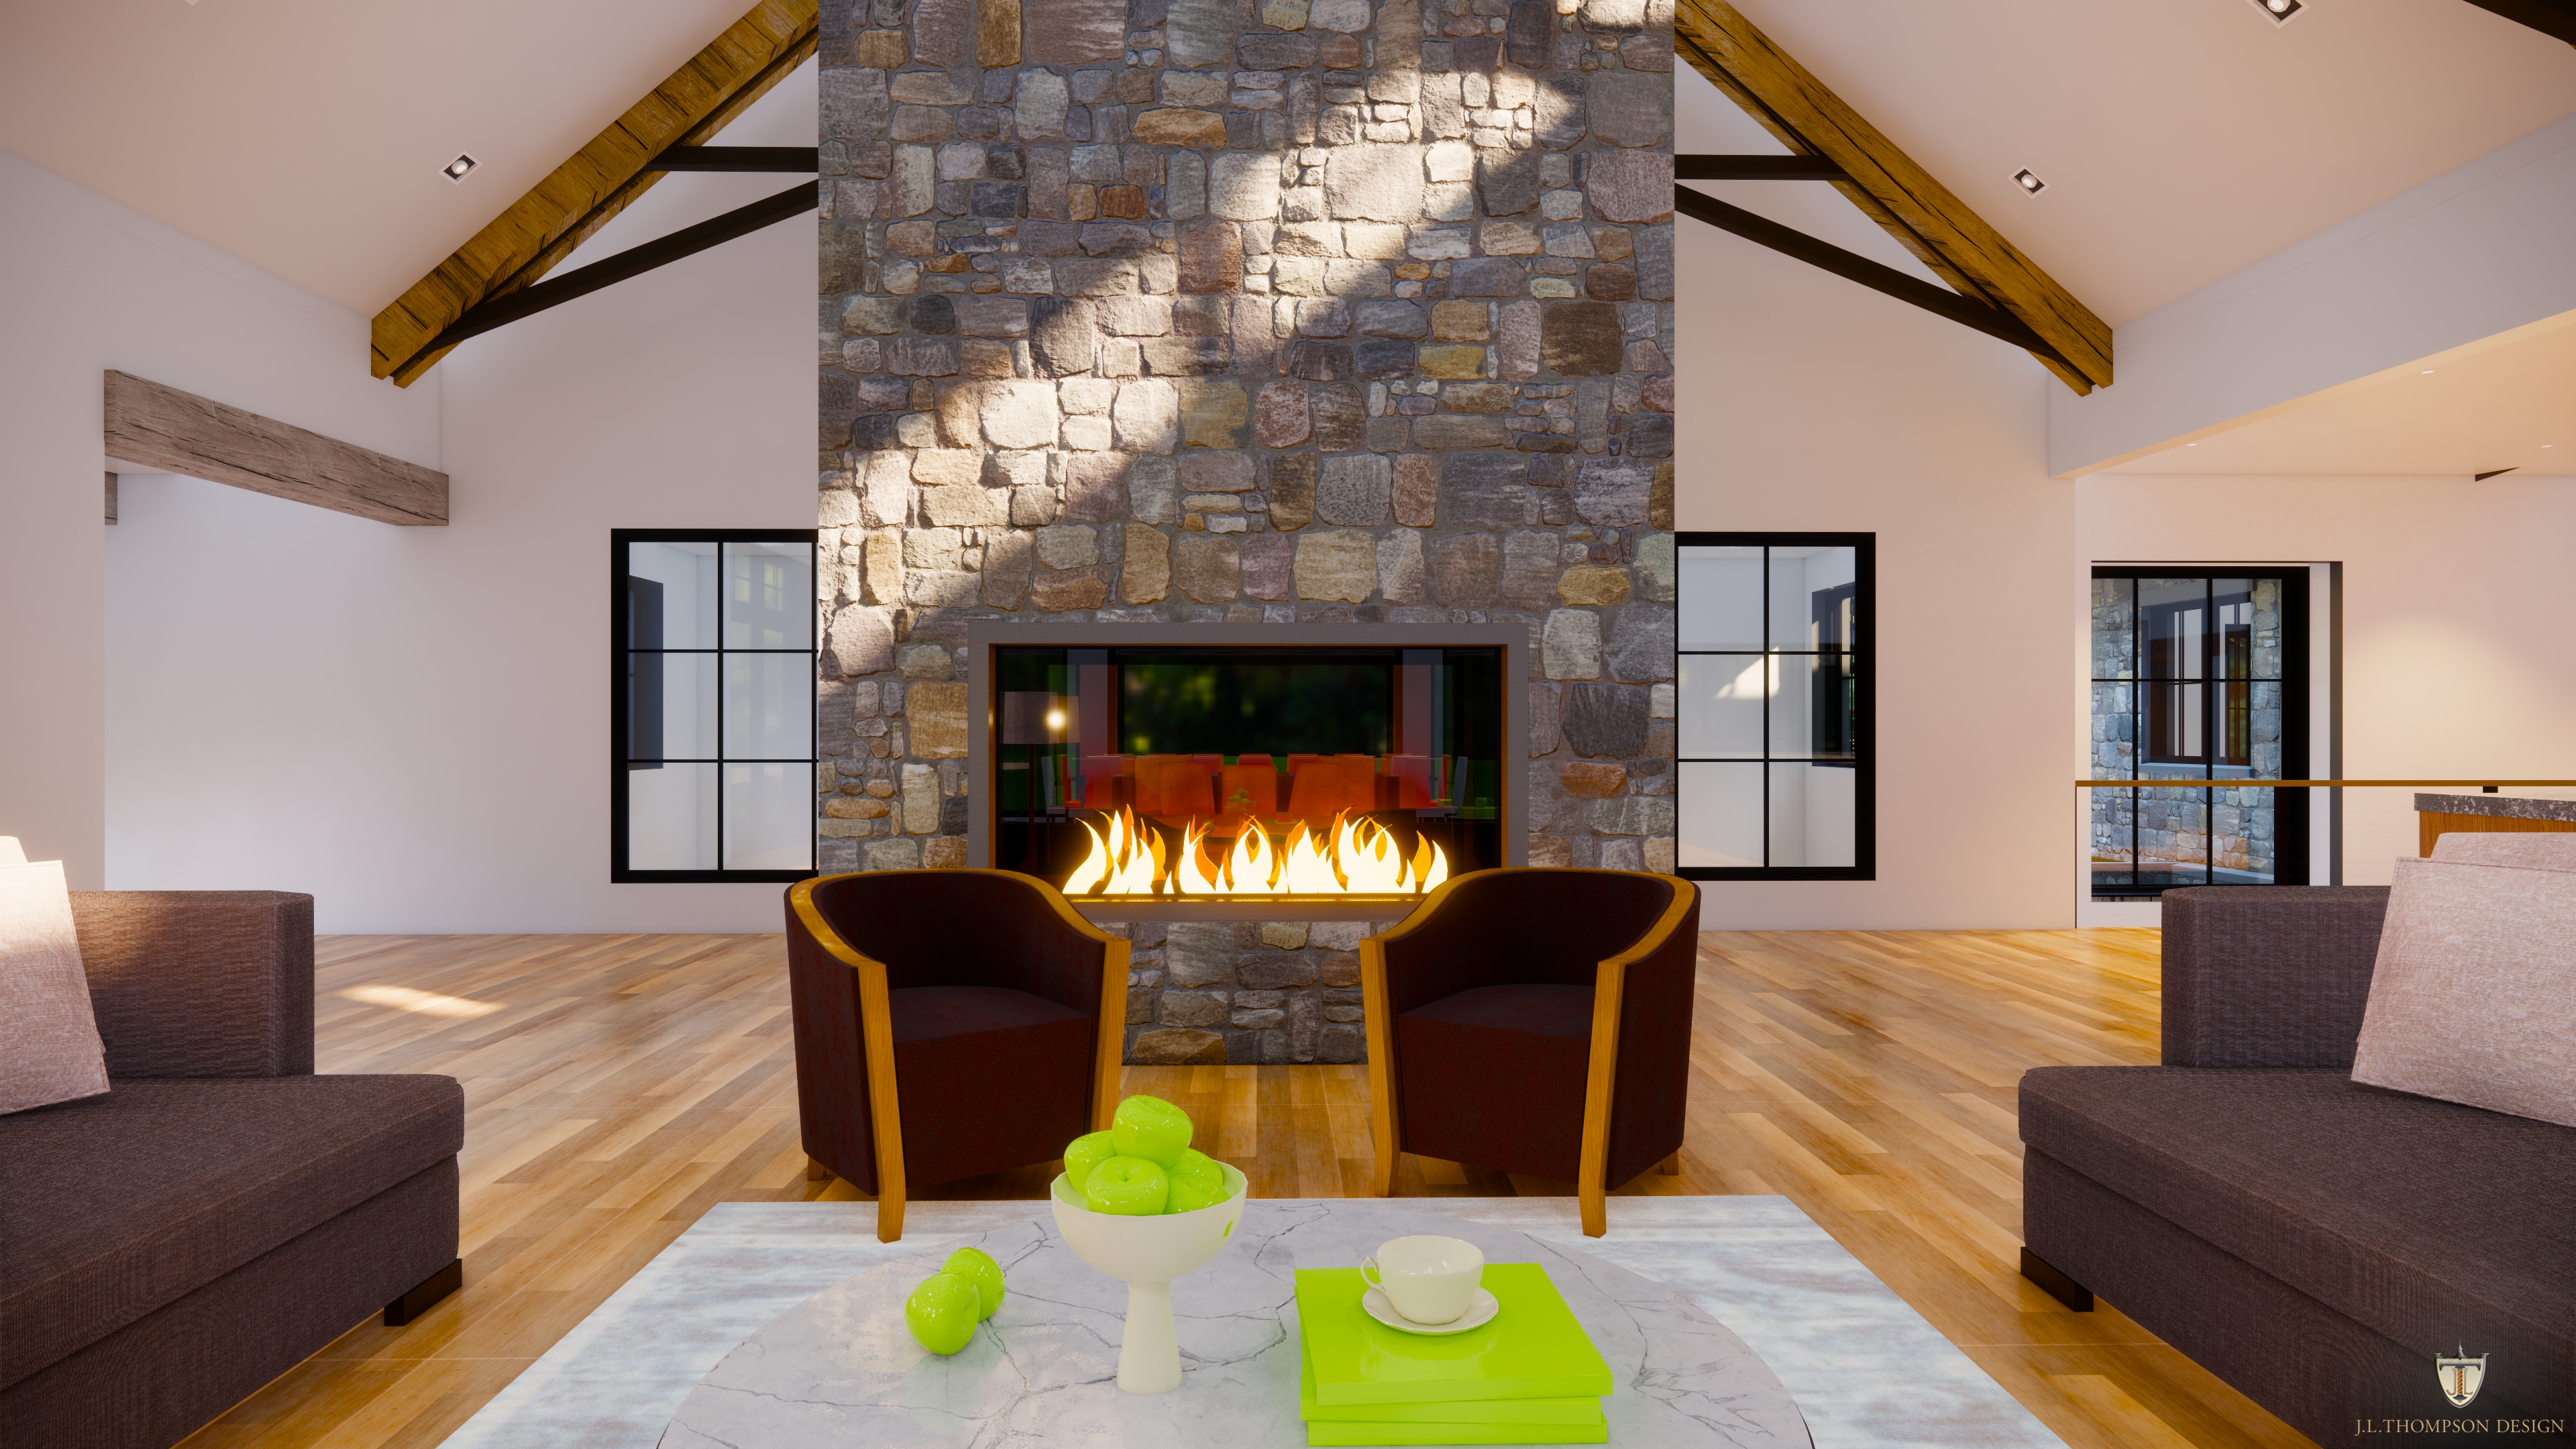 Enscape_2021-04-14-10-49-42_E_GREAT-ROOM-FIREPLACE-2